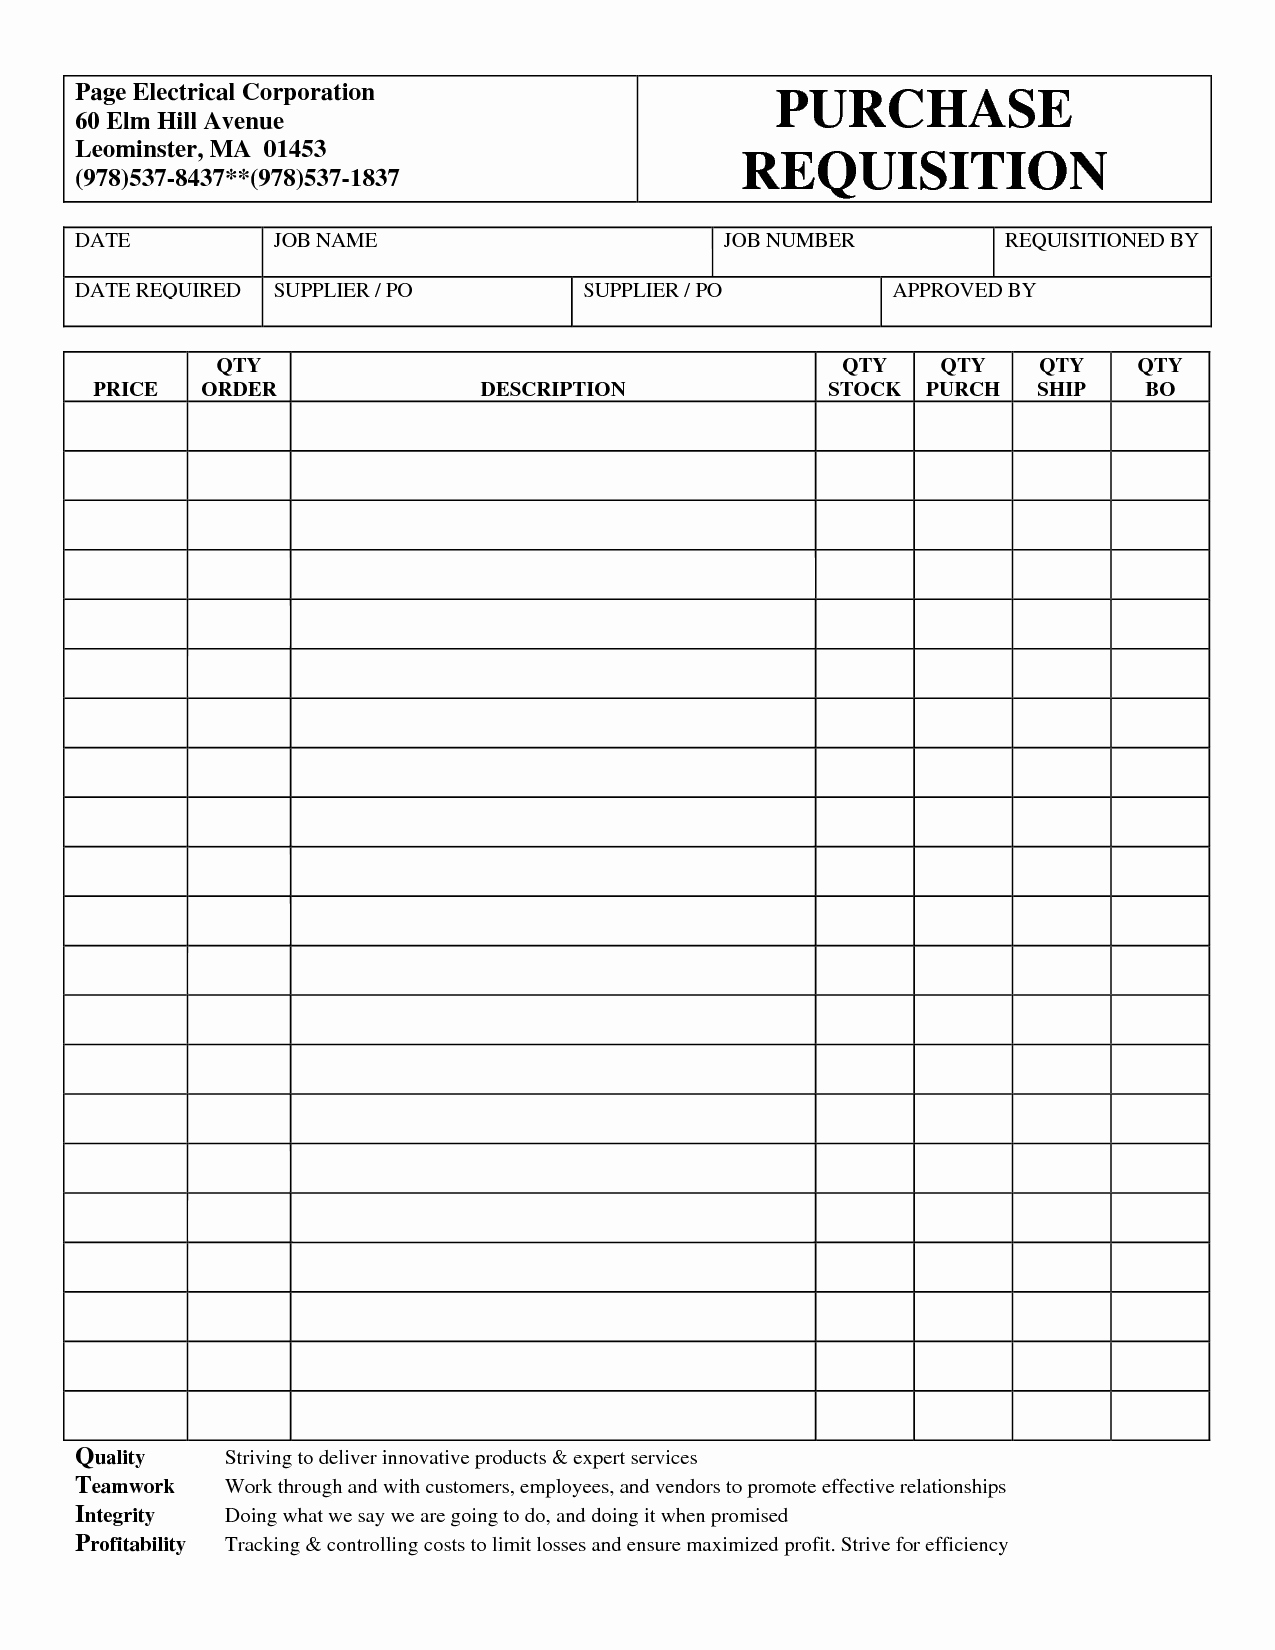 Purchase Requisition form Template Elegant Best S Of Purchase Requisition form Purchase